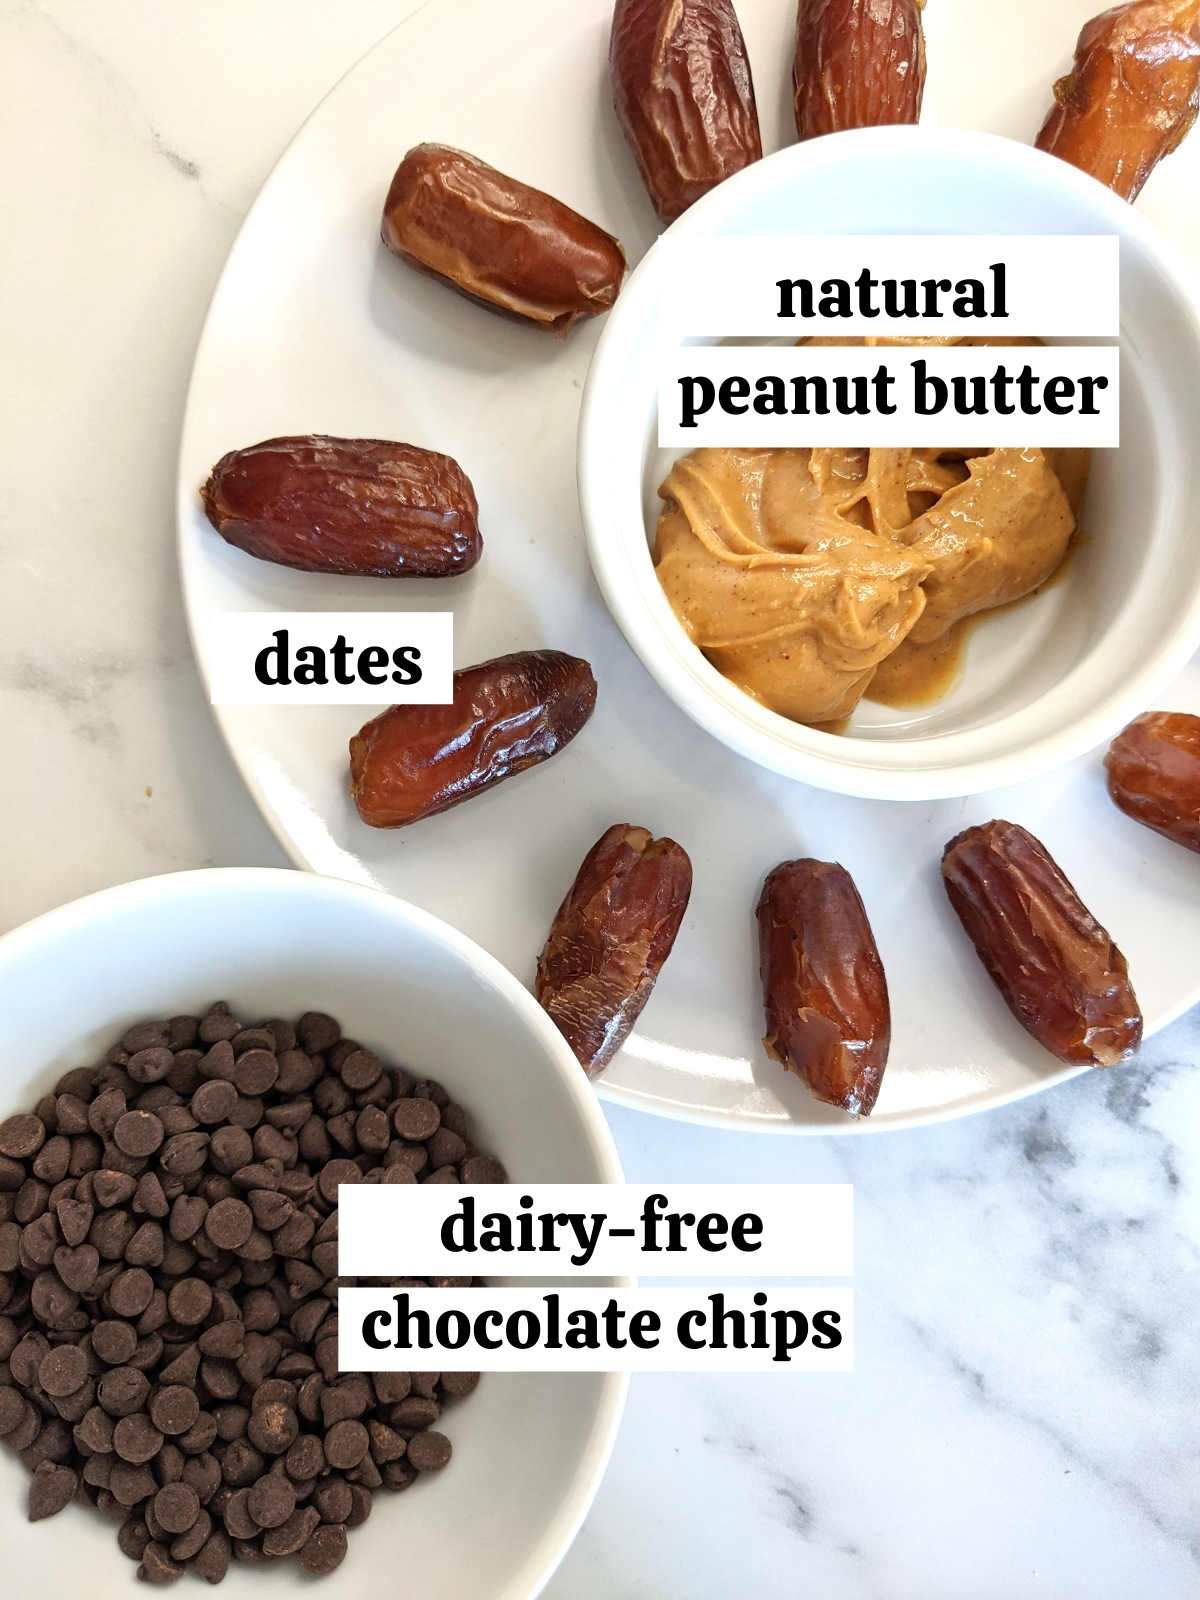 Ingredients for the chocolate covered peanut butter stuffed dates measured and labelled.